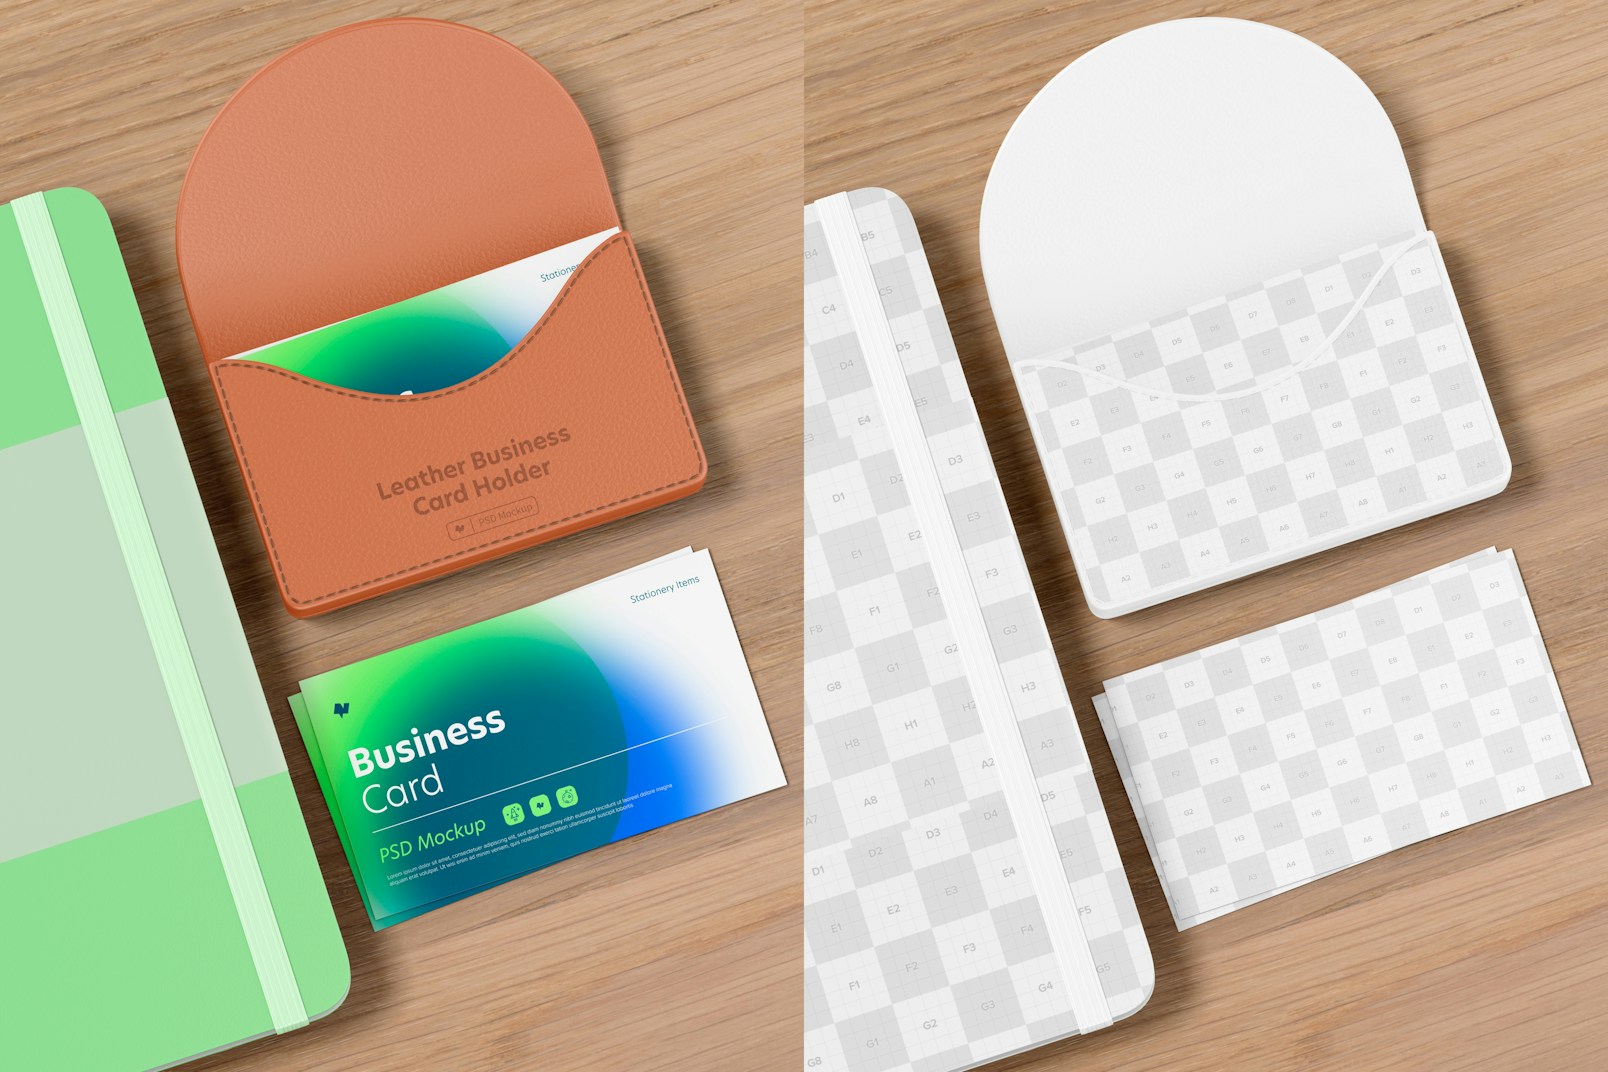 Leather Business Card Holder with Notebook Mockup